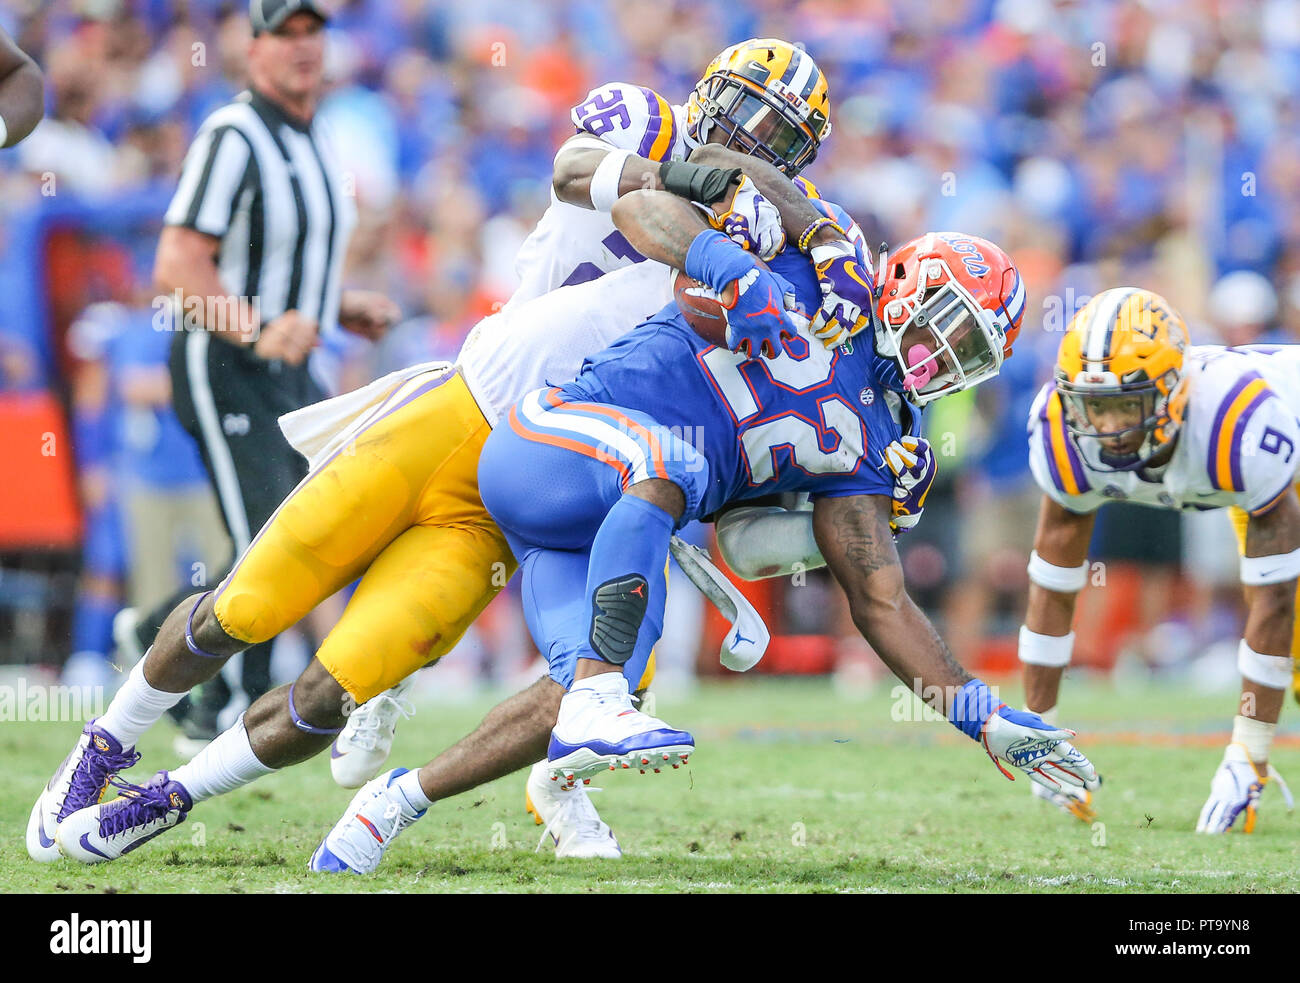 Oct 6 - Gainesville, FL, U.S.: LSU Tigers safety John Battle (26) tackles Florida Gators running back Lamical Perine (22) during the second half of NCAA football action at University of Florida. (Gary Lloyd McCullough/Cal Sport Media) Stock Photo